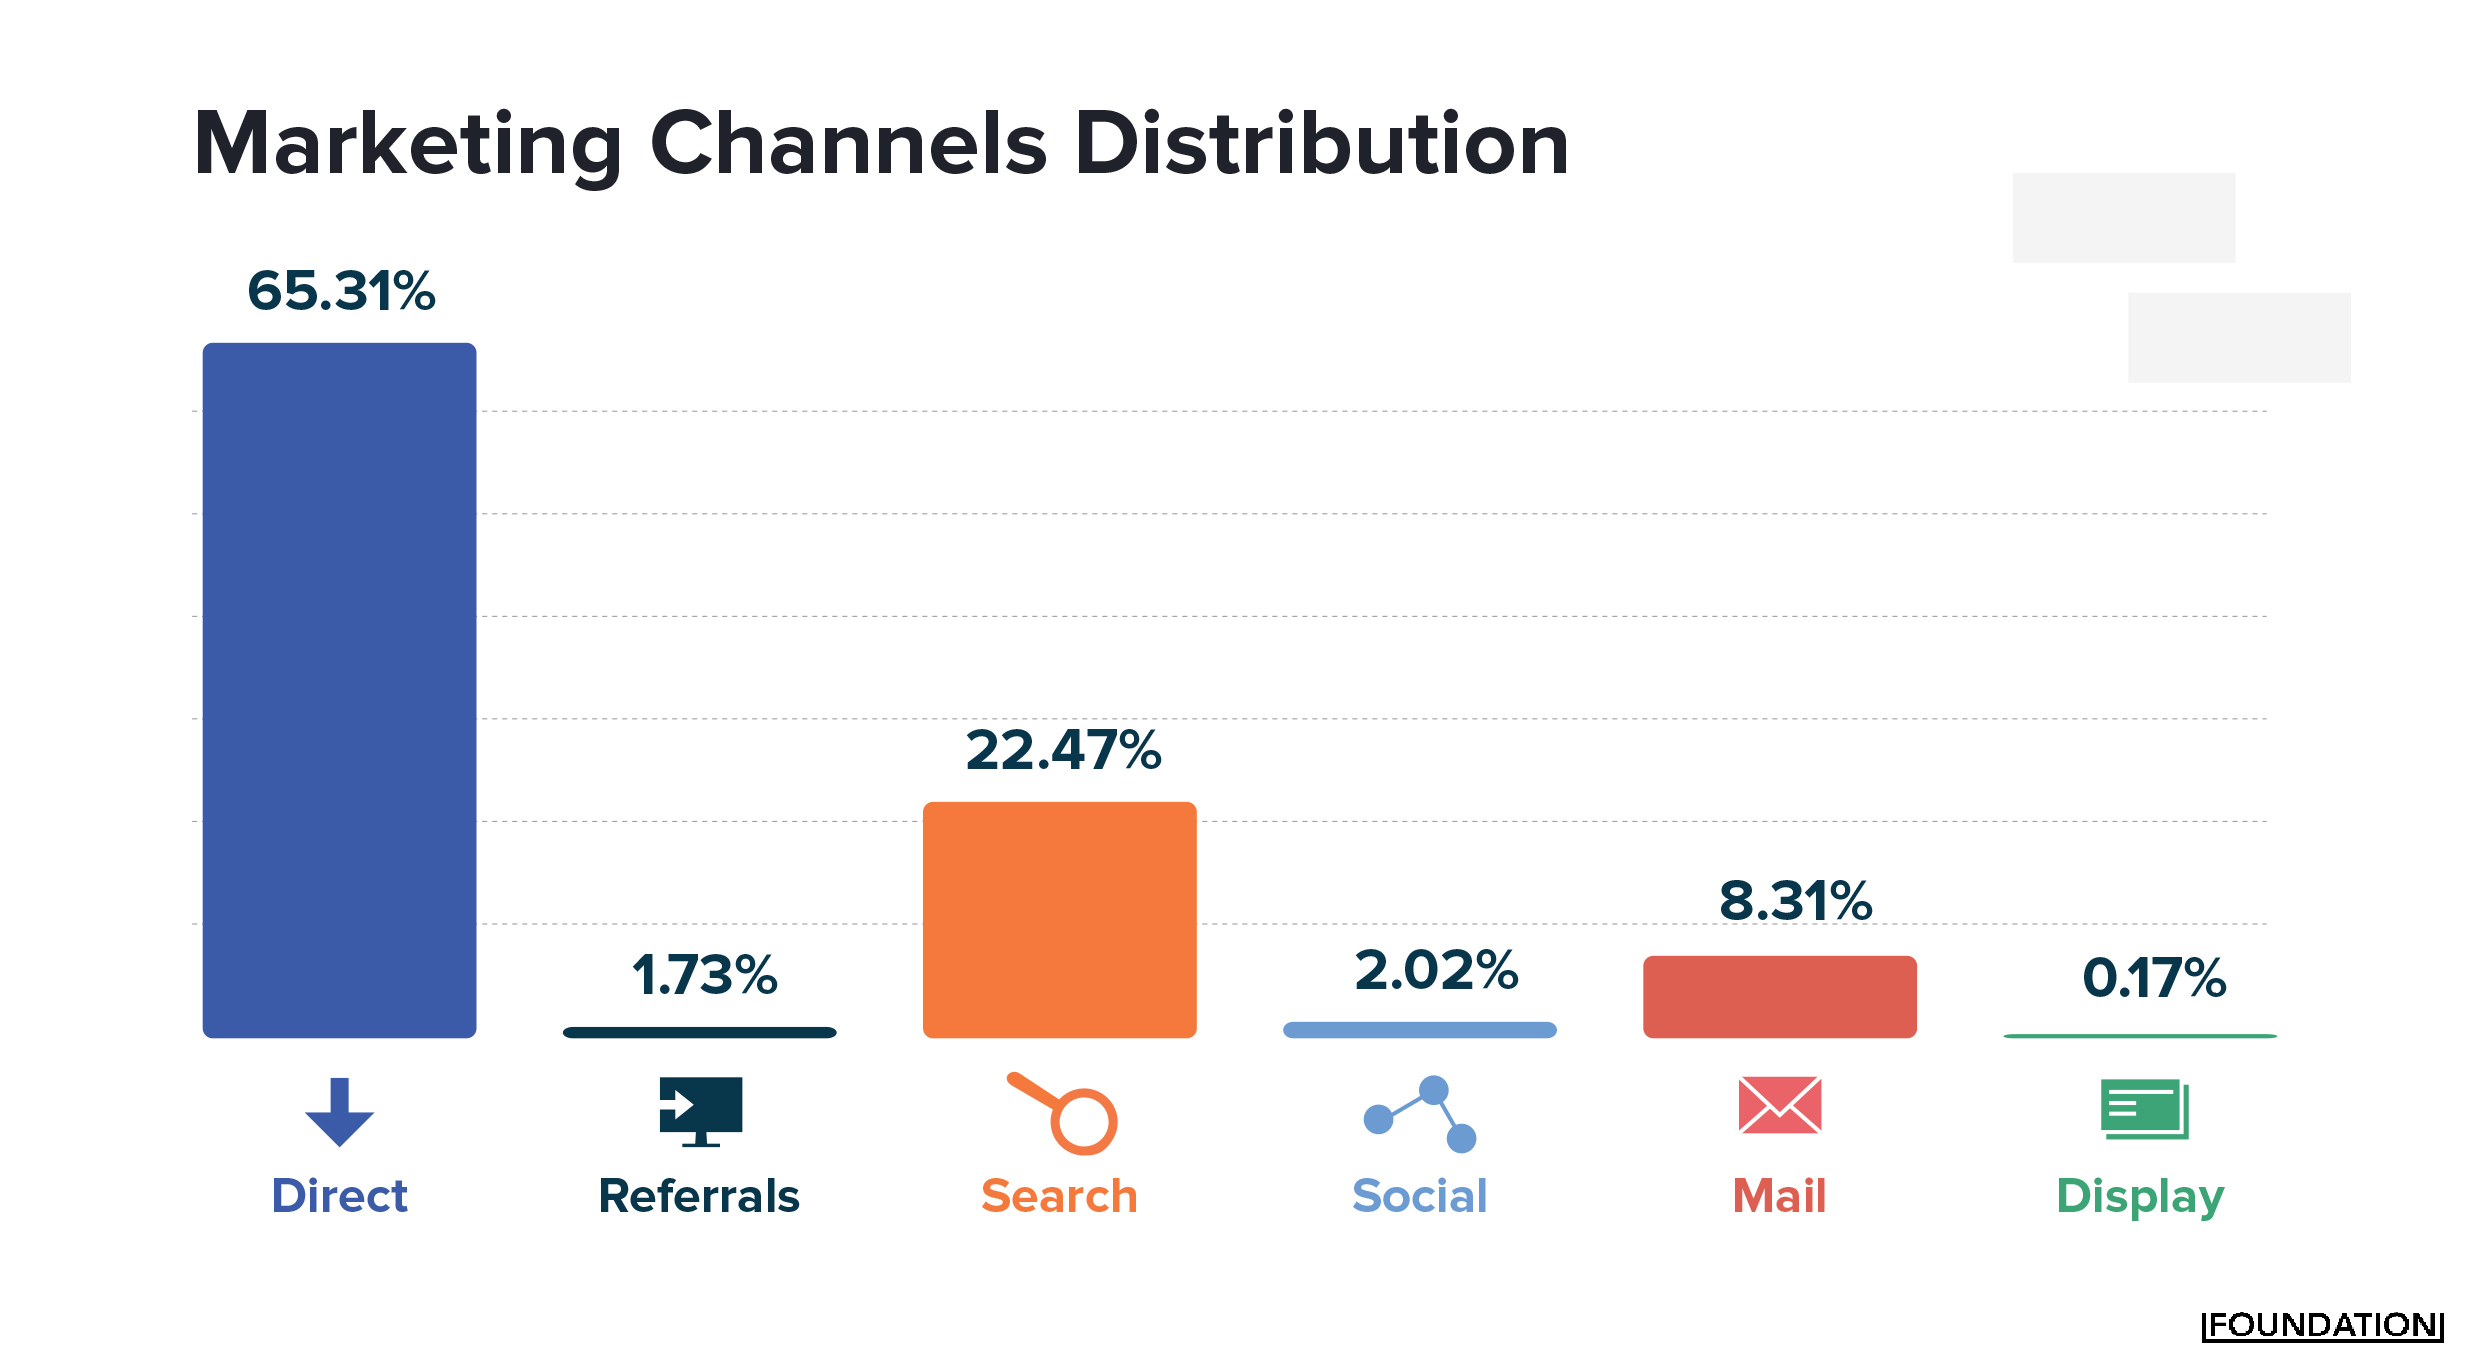 marketing channel distribution for Carta